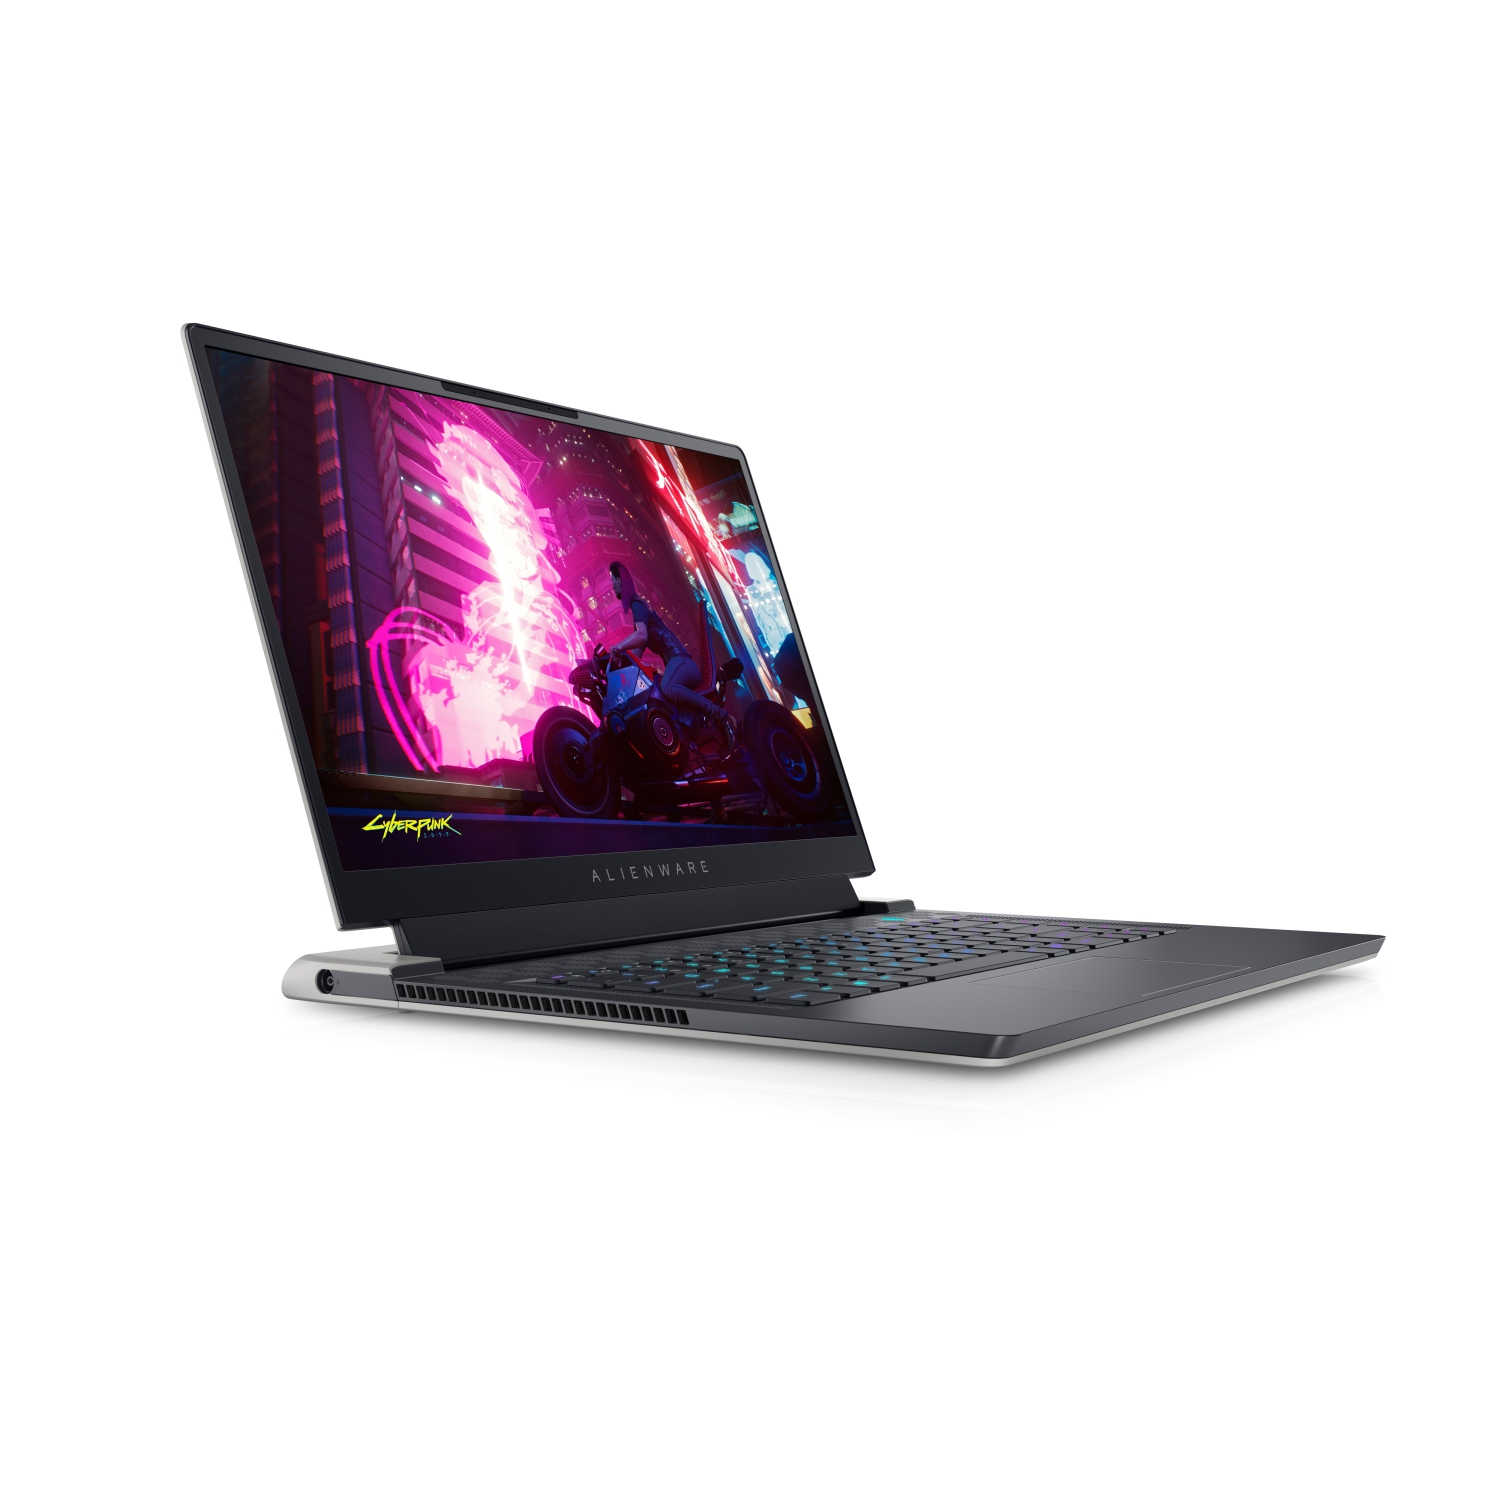 Refurbished (Excellent) - Dell Alienware X15 R1 Gaming Laptop (2021), 15.6" FHD, Core i7, 512GB SSD, 16GB RAM, RTX 3060, 8 Cores @ 4.6 GHz, 11th Gen CPU Certified